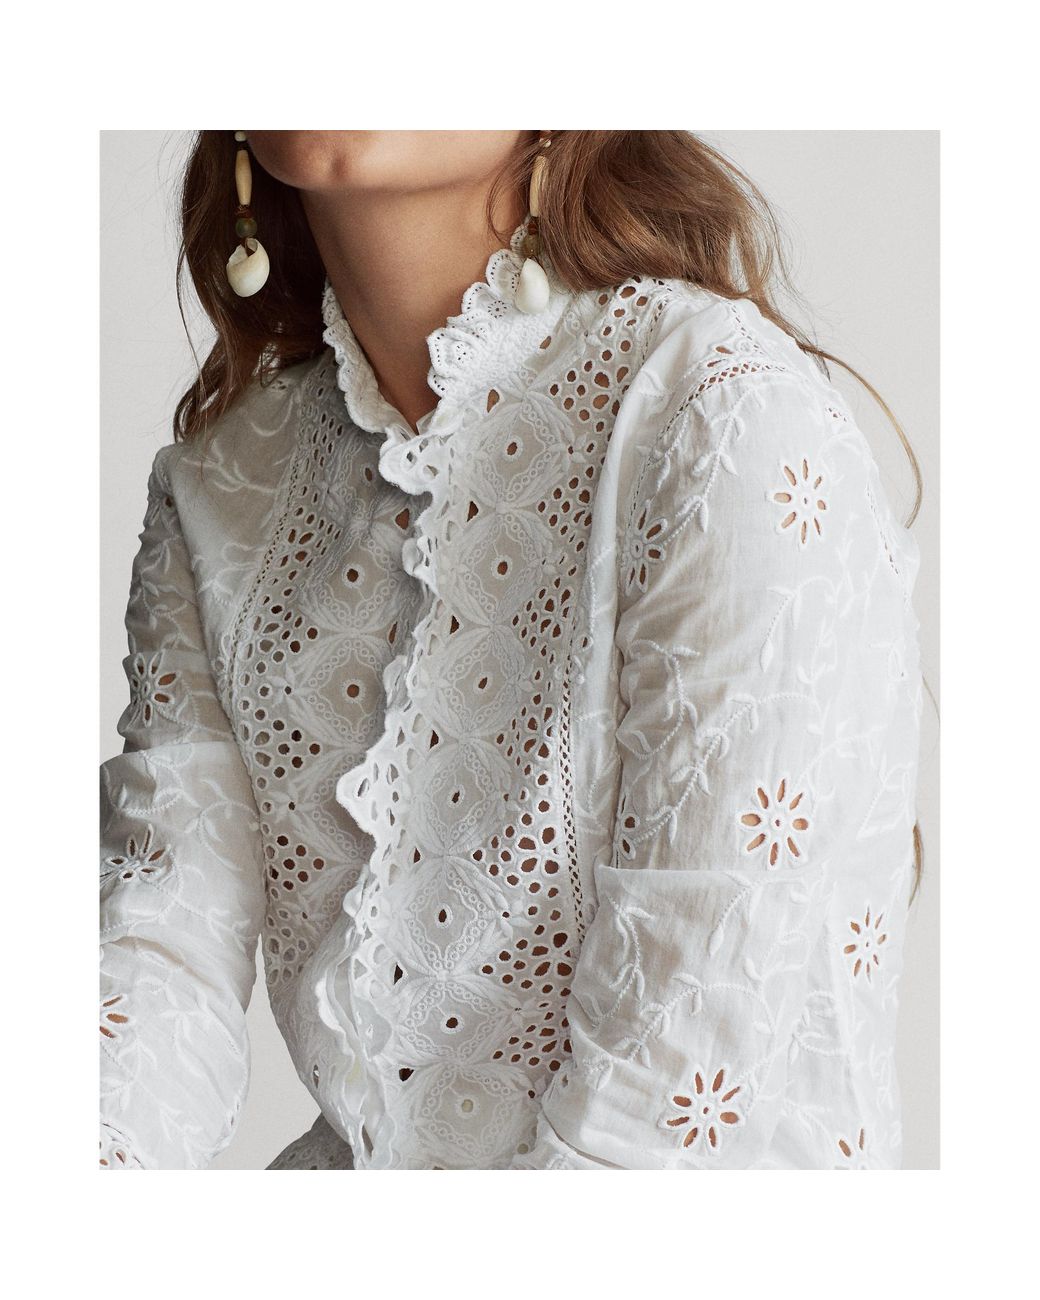 Polo Ralph Lauren Embroidered Eyelet Shirt in White | Lyst